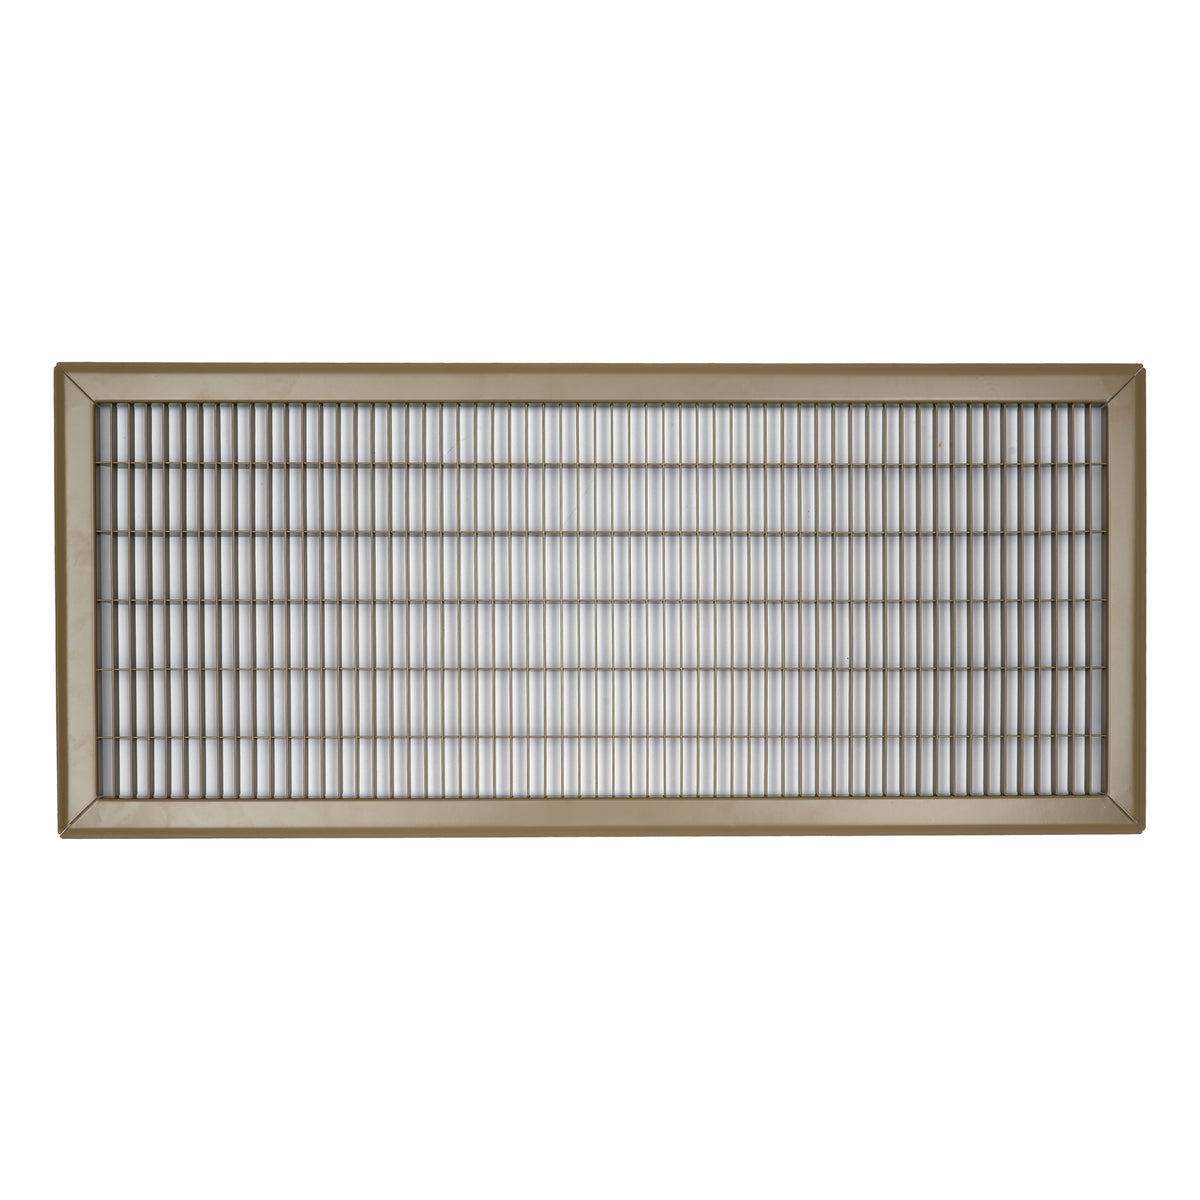 12"W x 30"H [Duct Opening] Return Air Floor Grille | Vent Cover Grill for Floor - Brown| Outer Dimensions: 13.75"W X 31.75"H